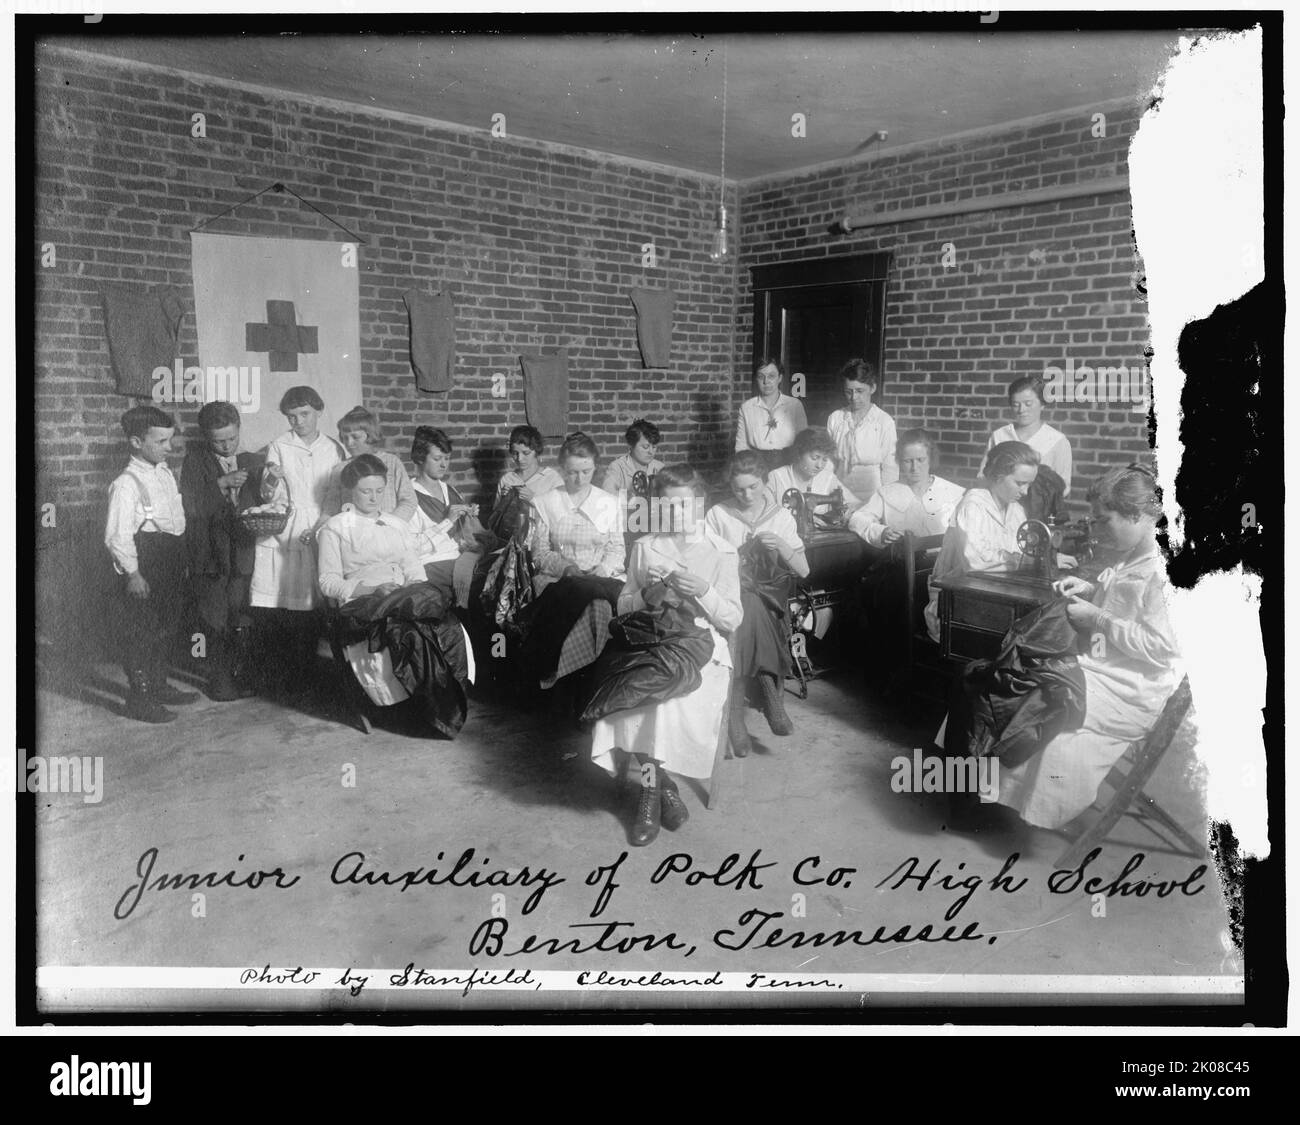 Red Cross: Junior Auxiliary of Polk Co. High School, Benton, Tennessee, between 1910 and 1920. Stock Photo